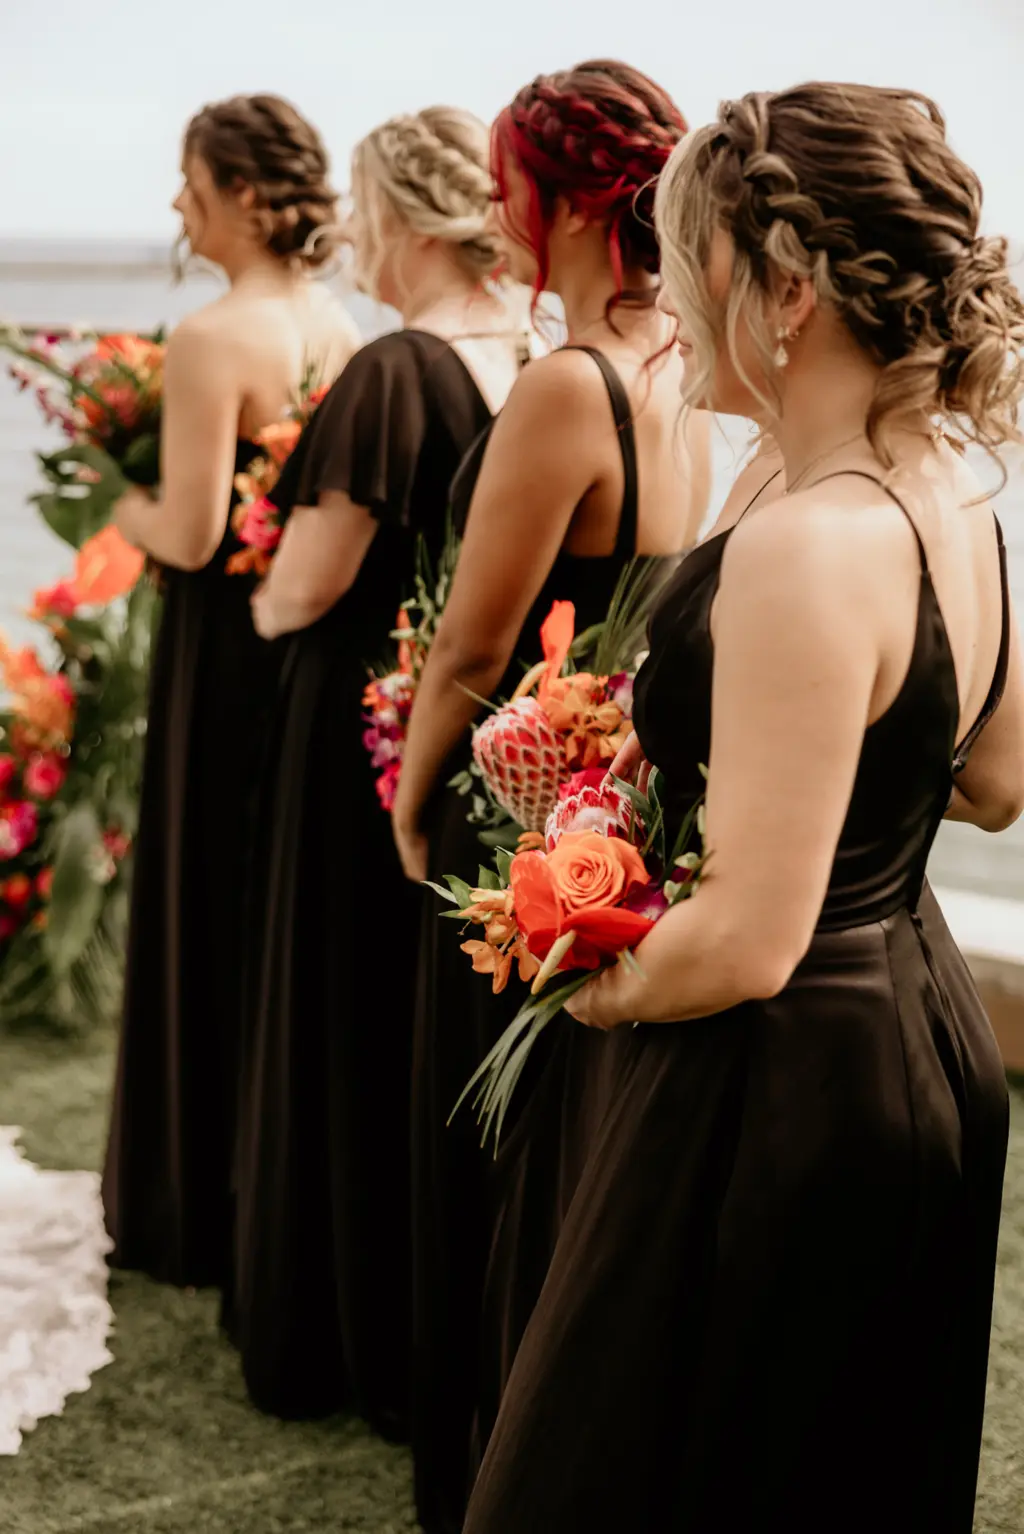 Bridesmaids in all Black Floor Length Mix and Match Wedding Dress Holding Bright Pink, Orange, and Red Tropical Wedding Floral Bouquet Ideas | Clearwater Beach Florist Save the Date Florida